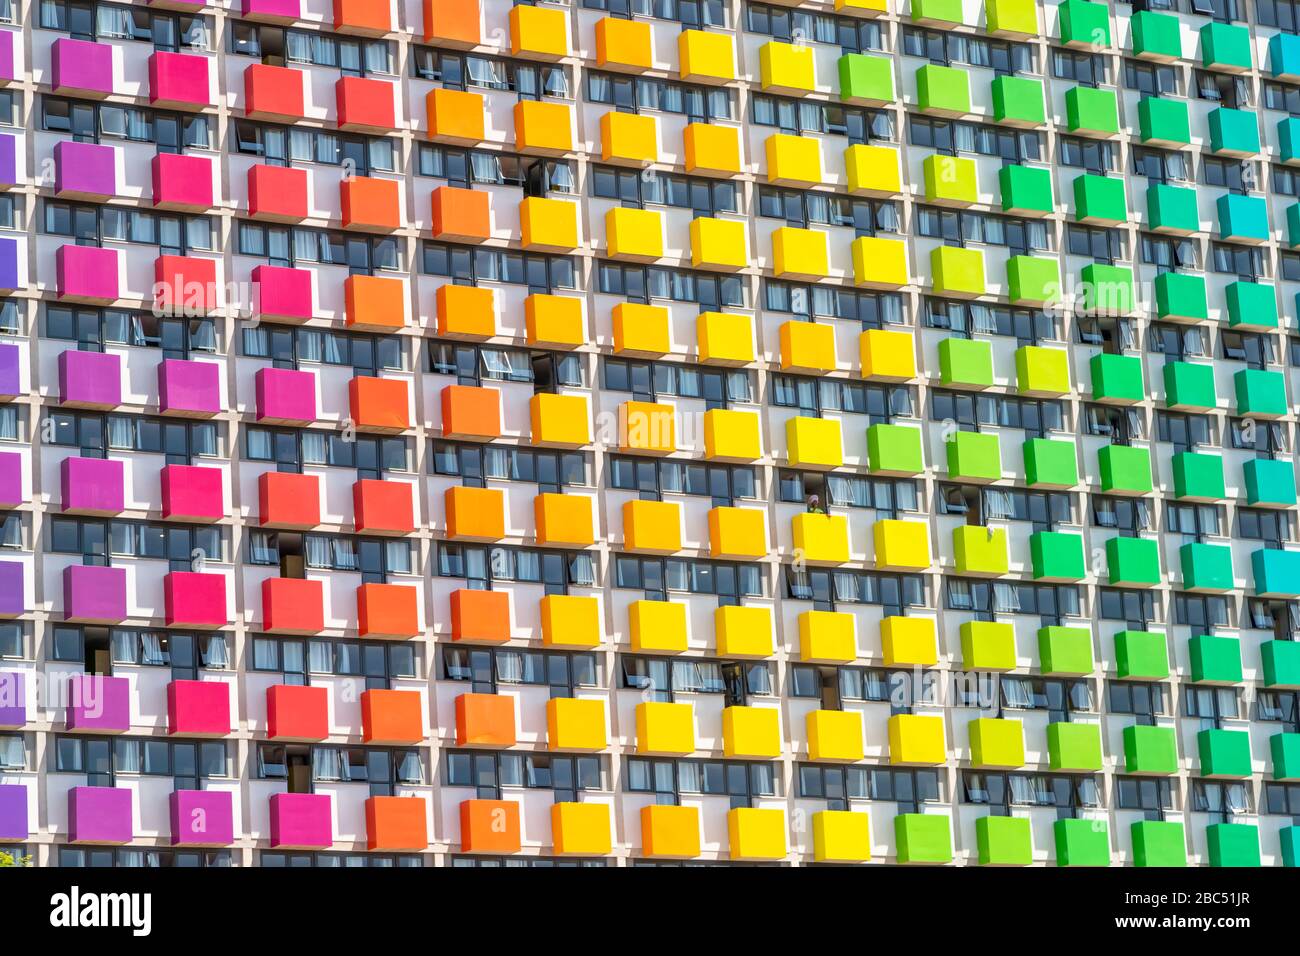 Pretoria, South Africa, 31st January - 2020: Colourful cladding on the balconies of student accommodation building. Stock Photo